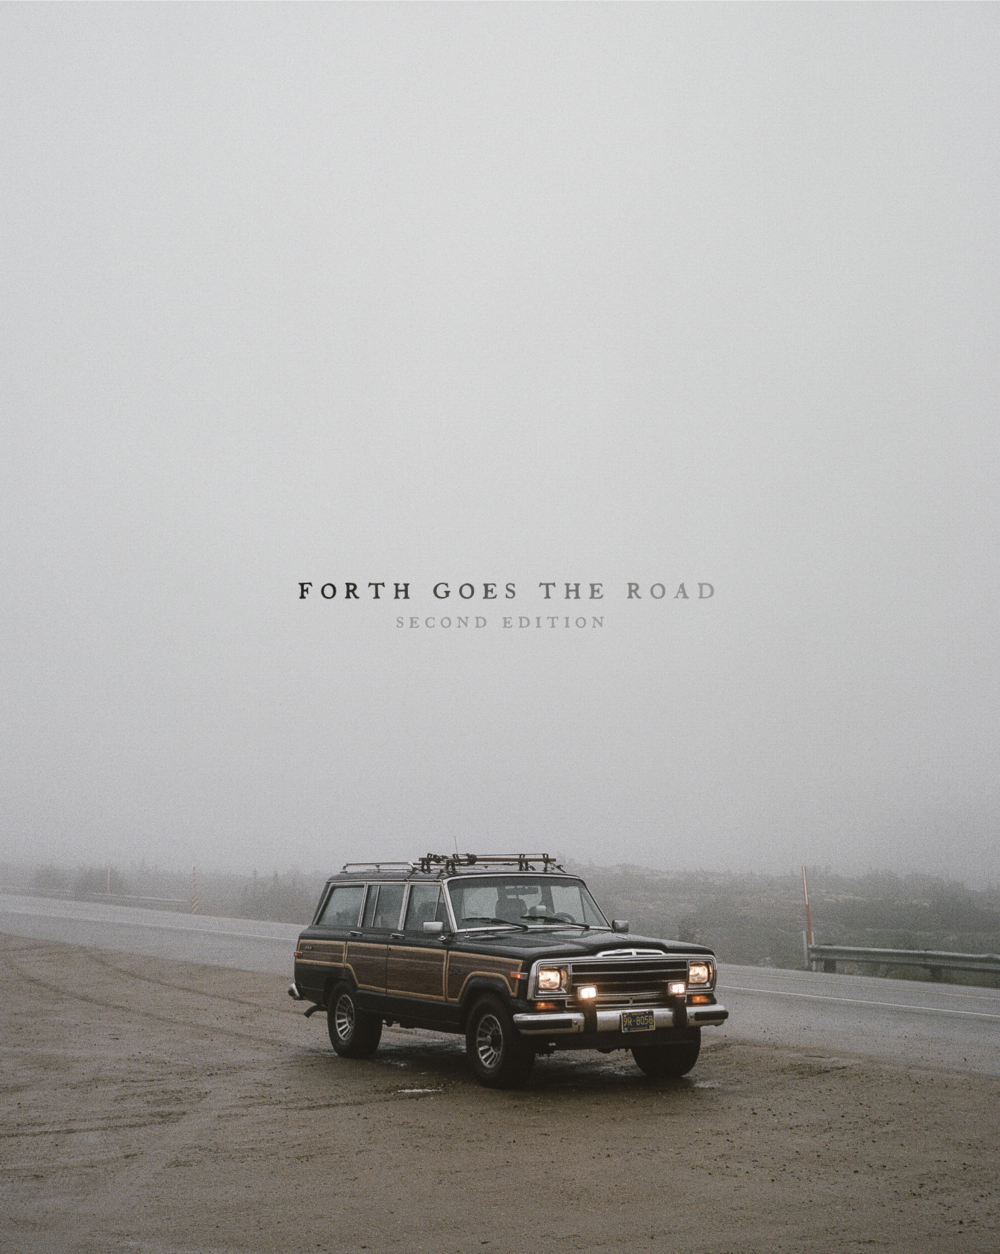 Wholesale - Forth Goes the Road - 2nd Edition Print